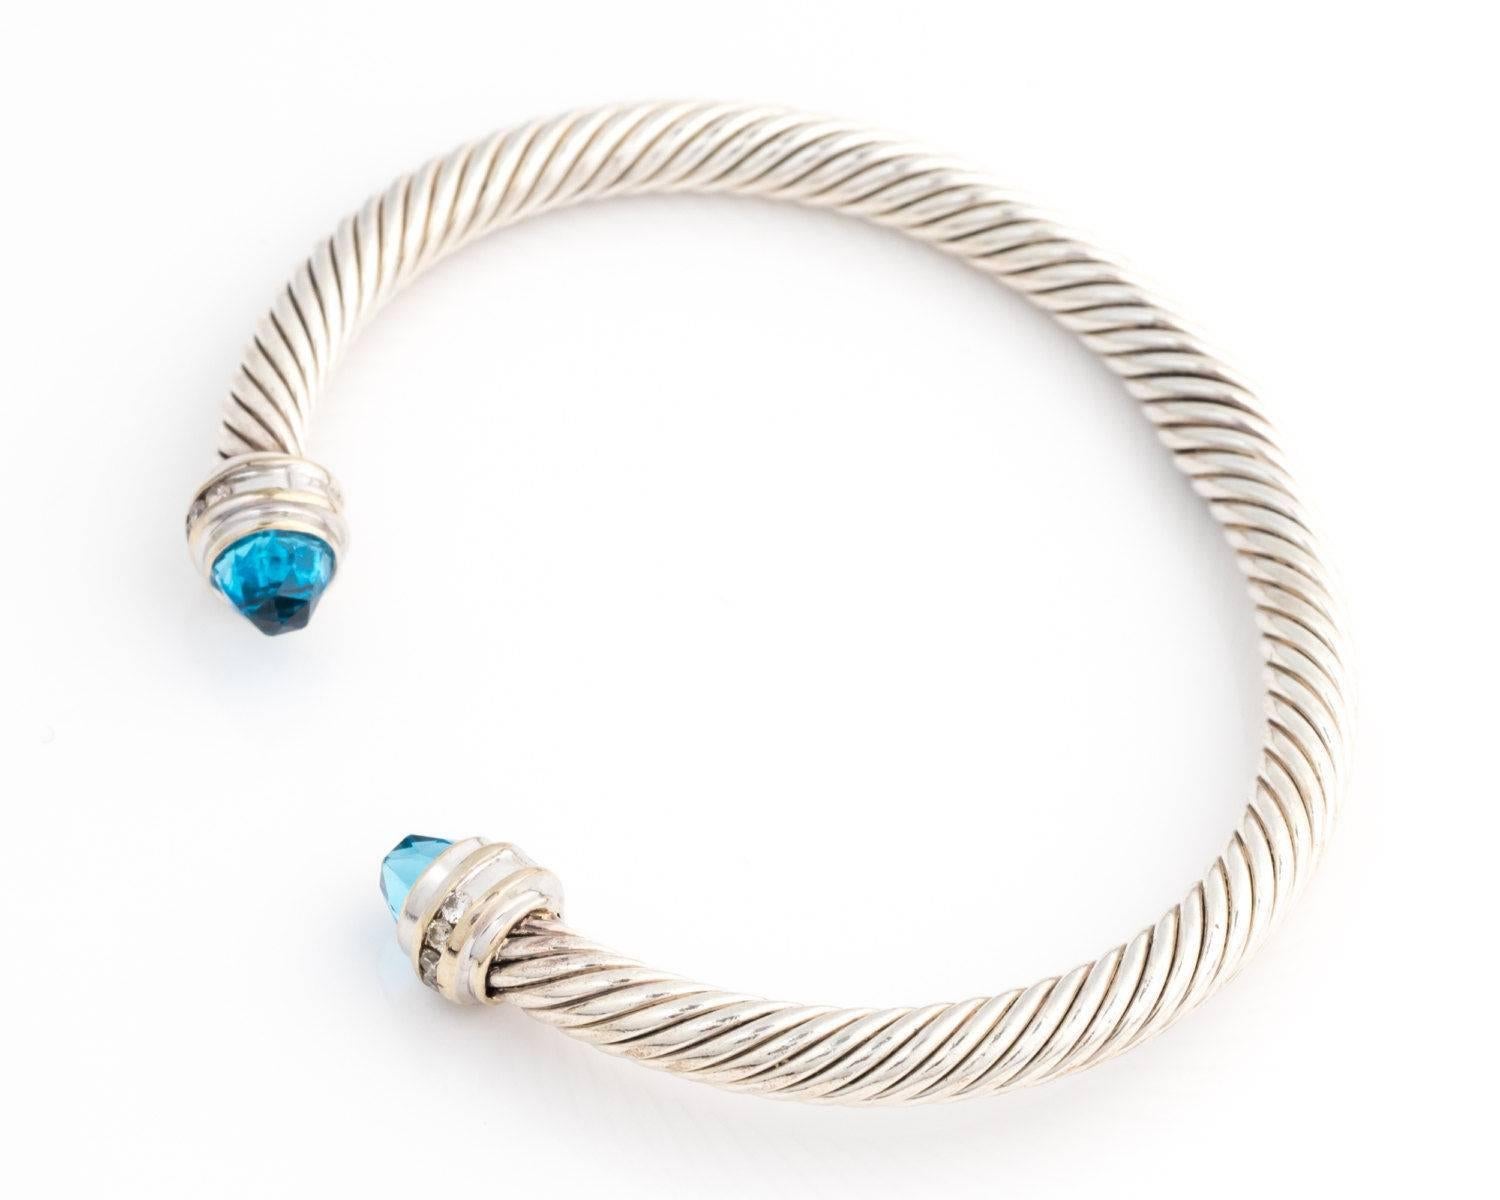 2000s David Yurman Cable Classics Bracelet with Blue Topaz, Diamonds, Sterling Silver, 18 Karat White Gold

Features Sterling Silver Cable with Blue Topaz Cabochon Ends and Diamond Accents. Each end is set with a sky Blue Topaz. A Diamond accented